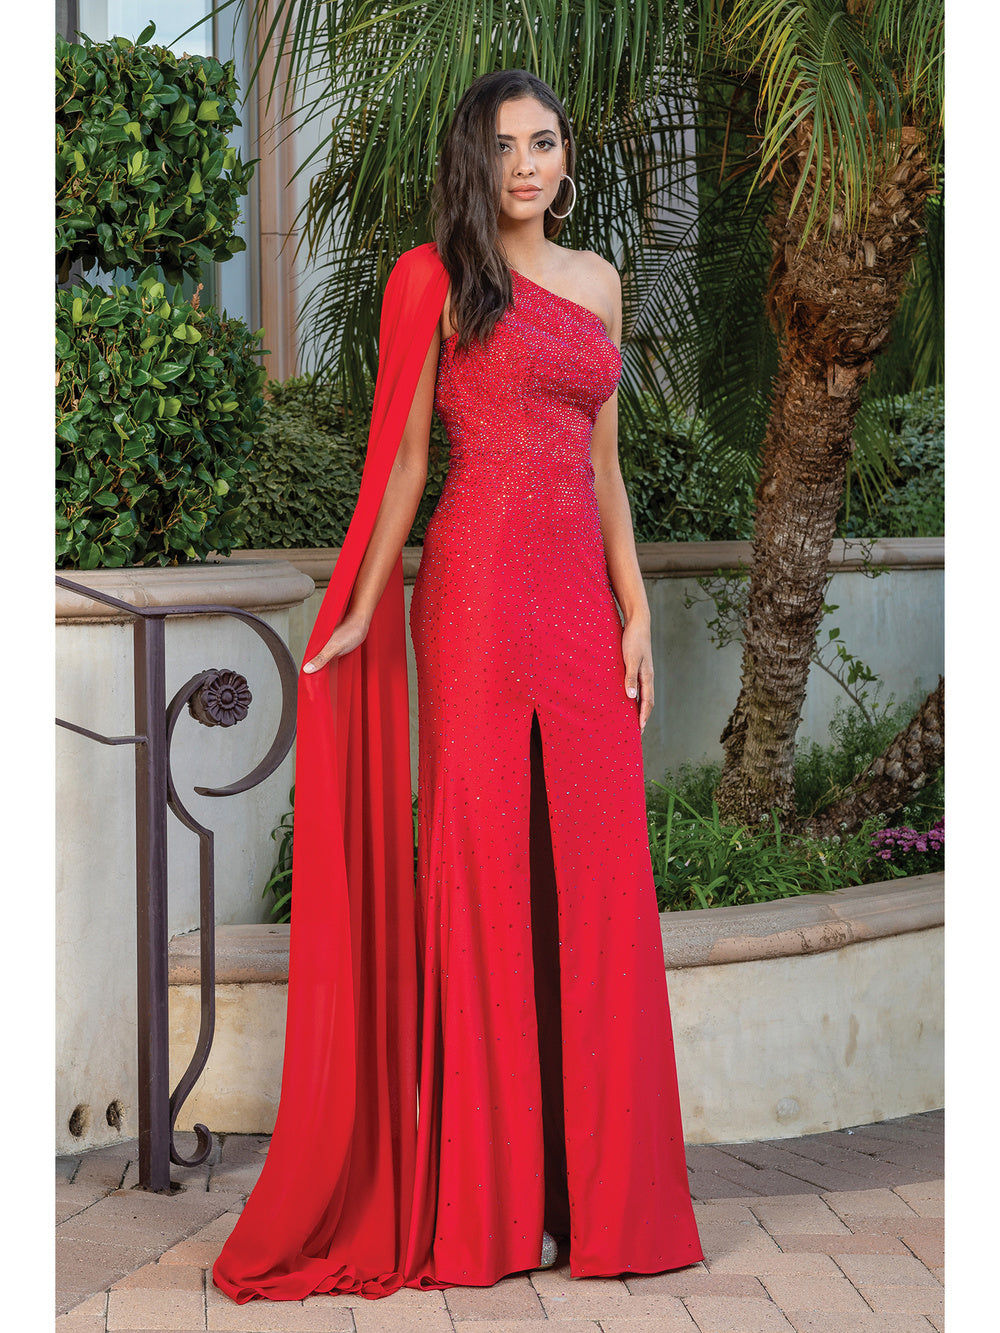 DQ 4284 Long Fitted Jersey One Shoulder Prom Dress & Pageant Gown with a flowing Cape off the shoulder and Slit in the skirt. Fully Crystal Embellished Fitted Bodice & sweeping train. Available Colors: Black, Dusty Blue, Hunter Green, Red, Sienna  Available Sizes: XS-3XL